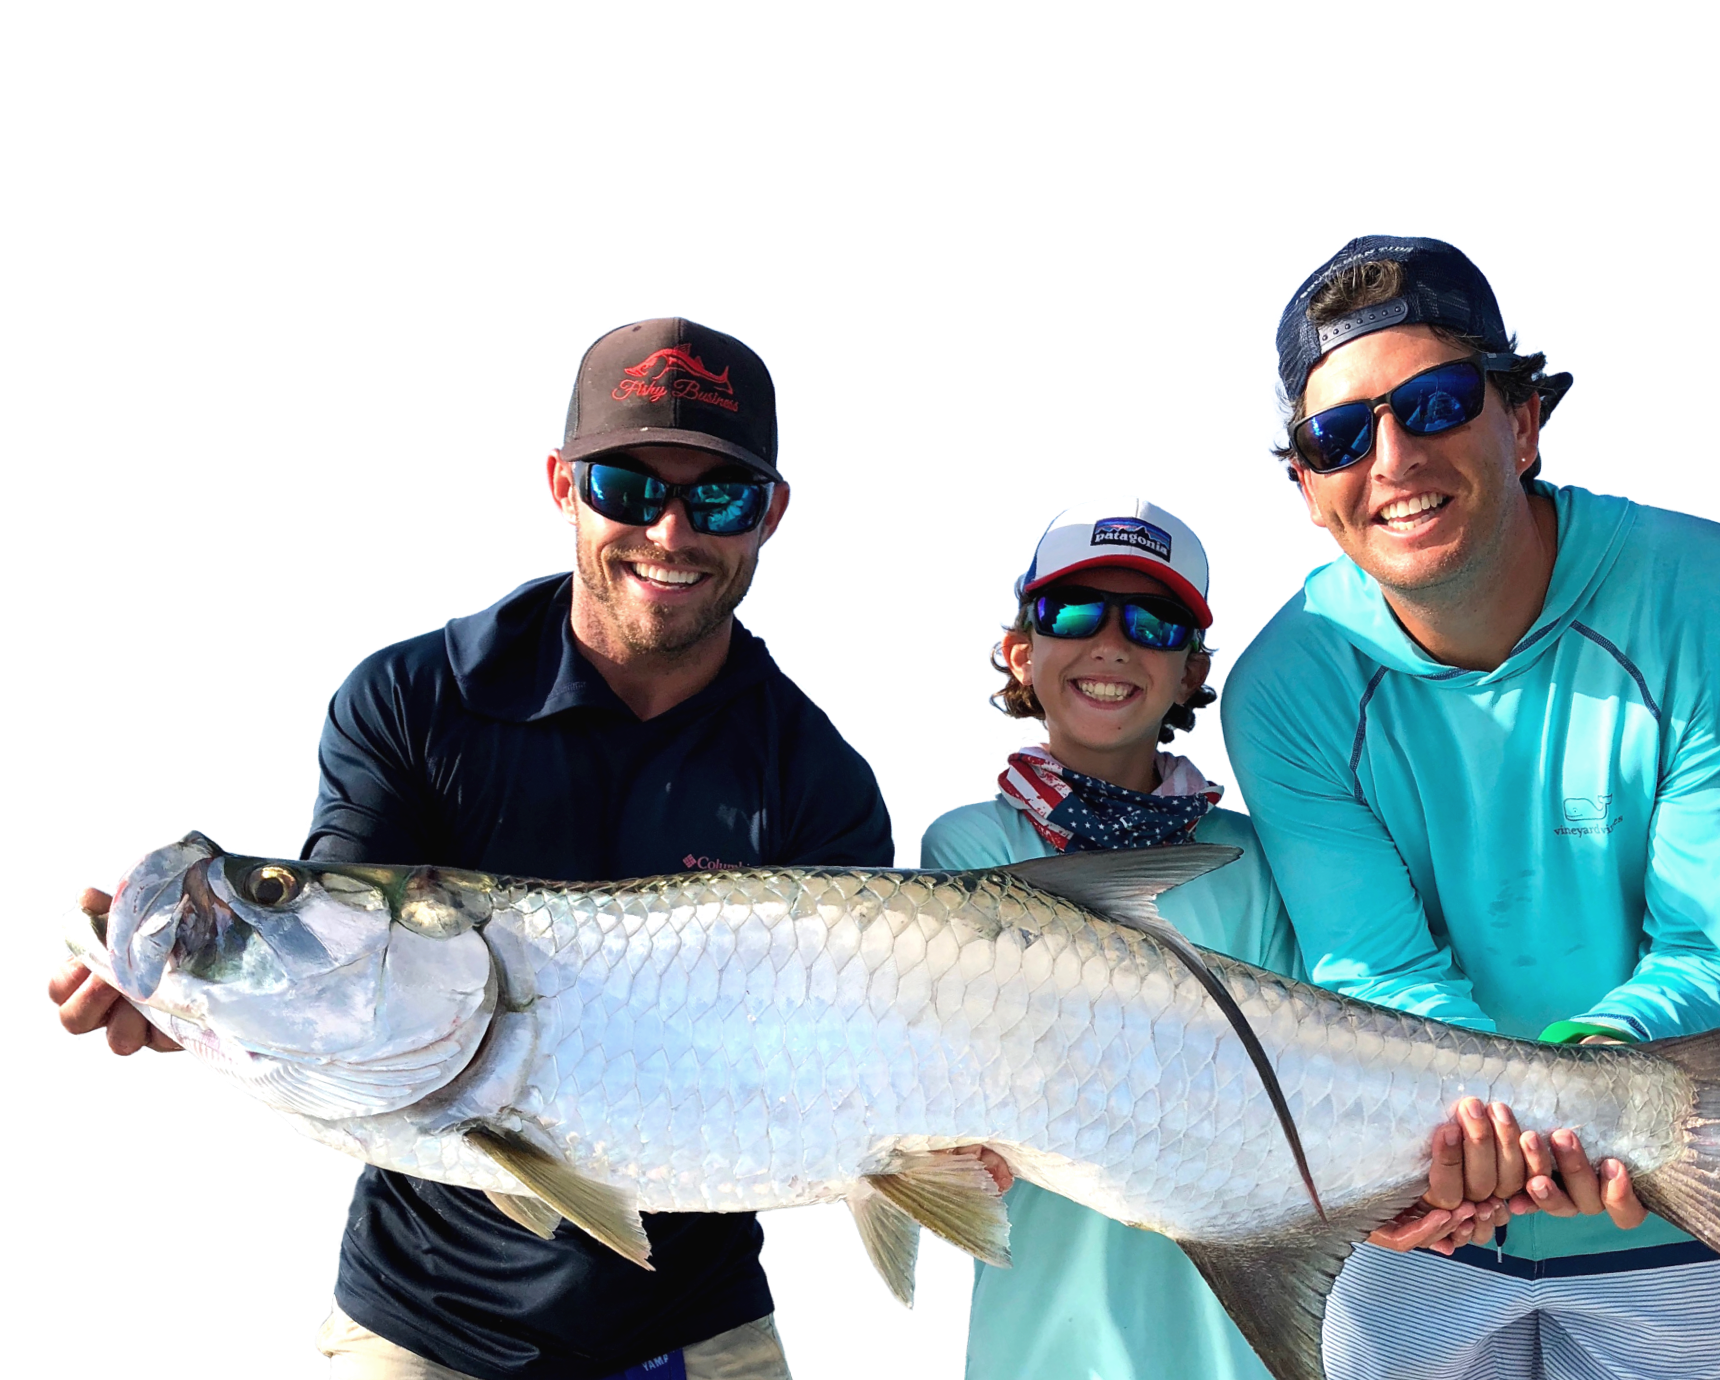 Captain Drew with male child and adult male posing with fish